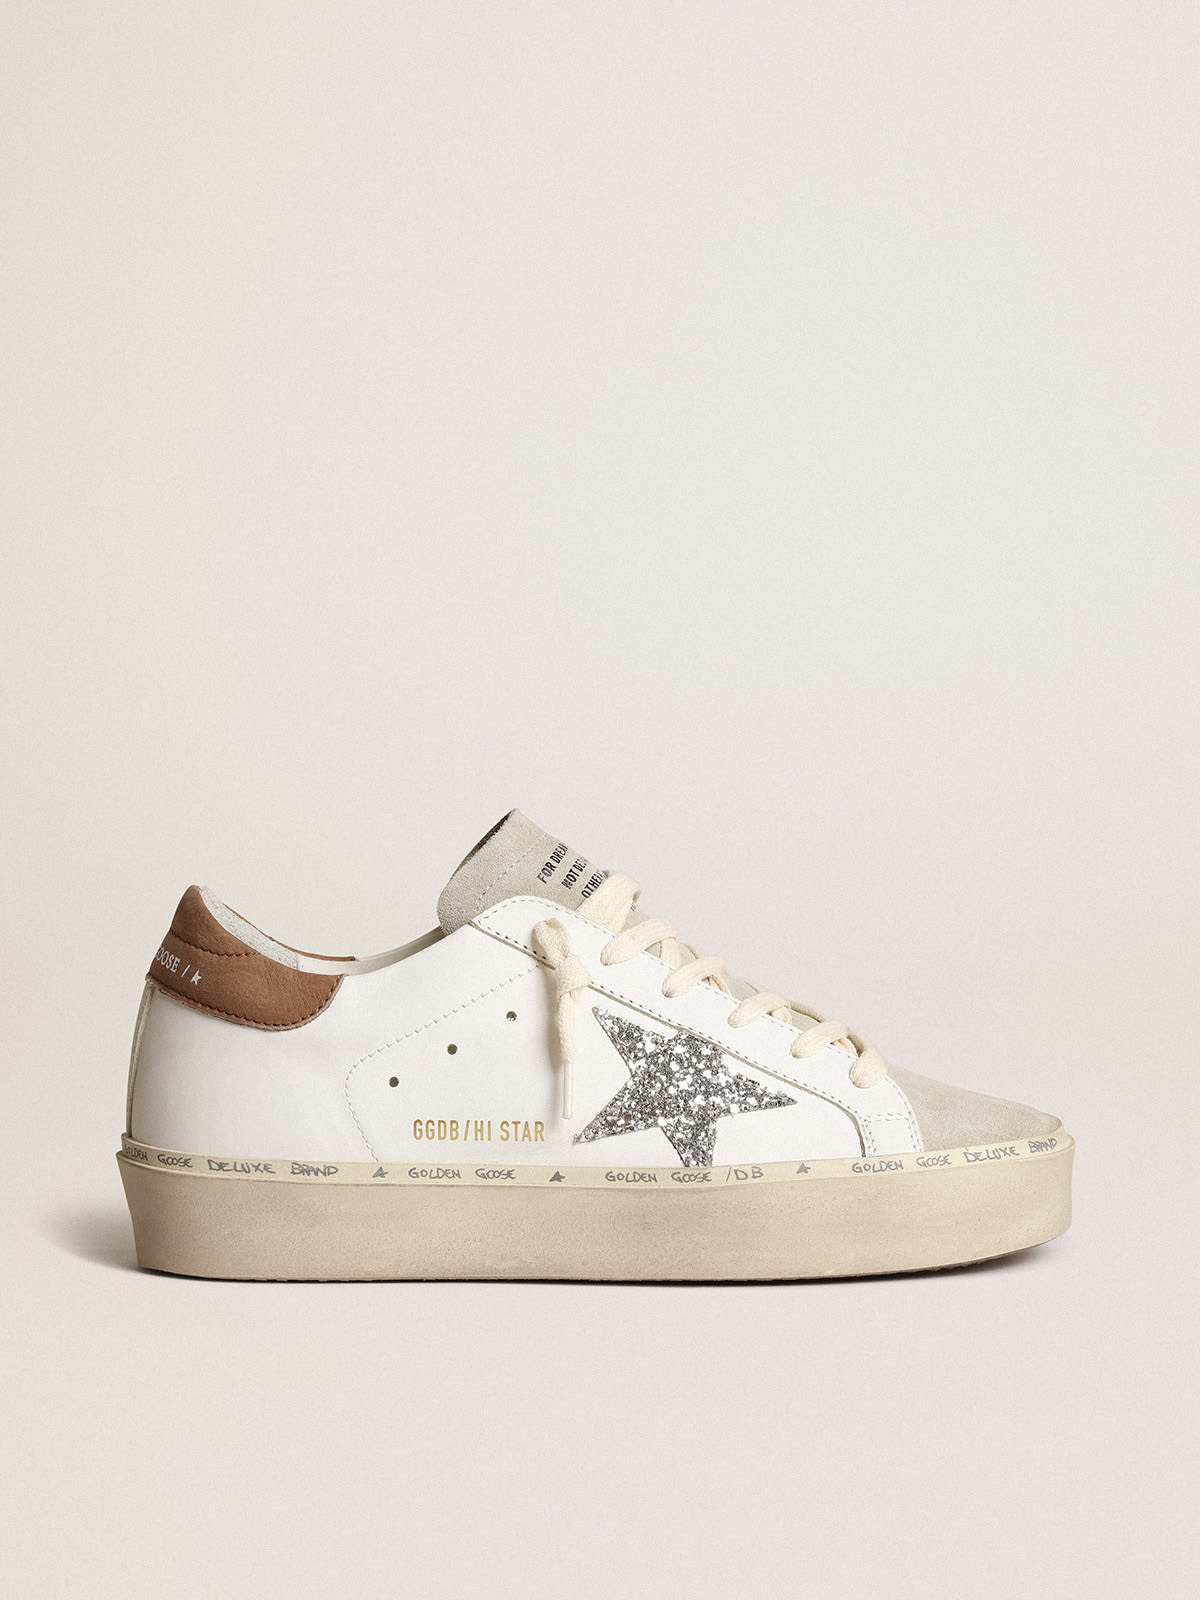 Gold-colored Super-Star sneakers with checkered pattern and 